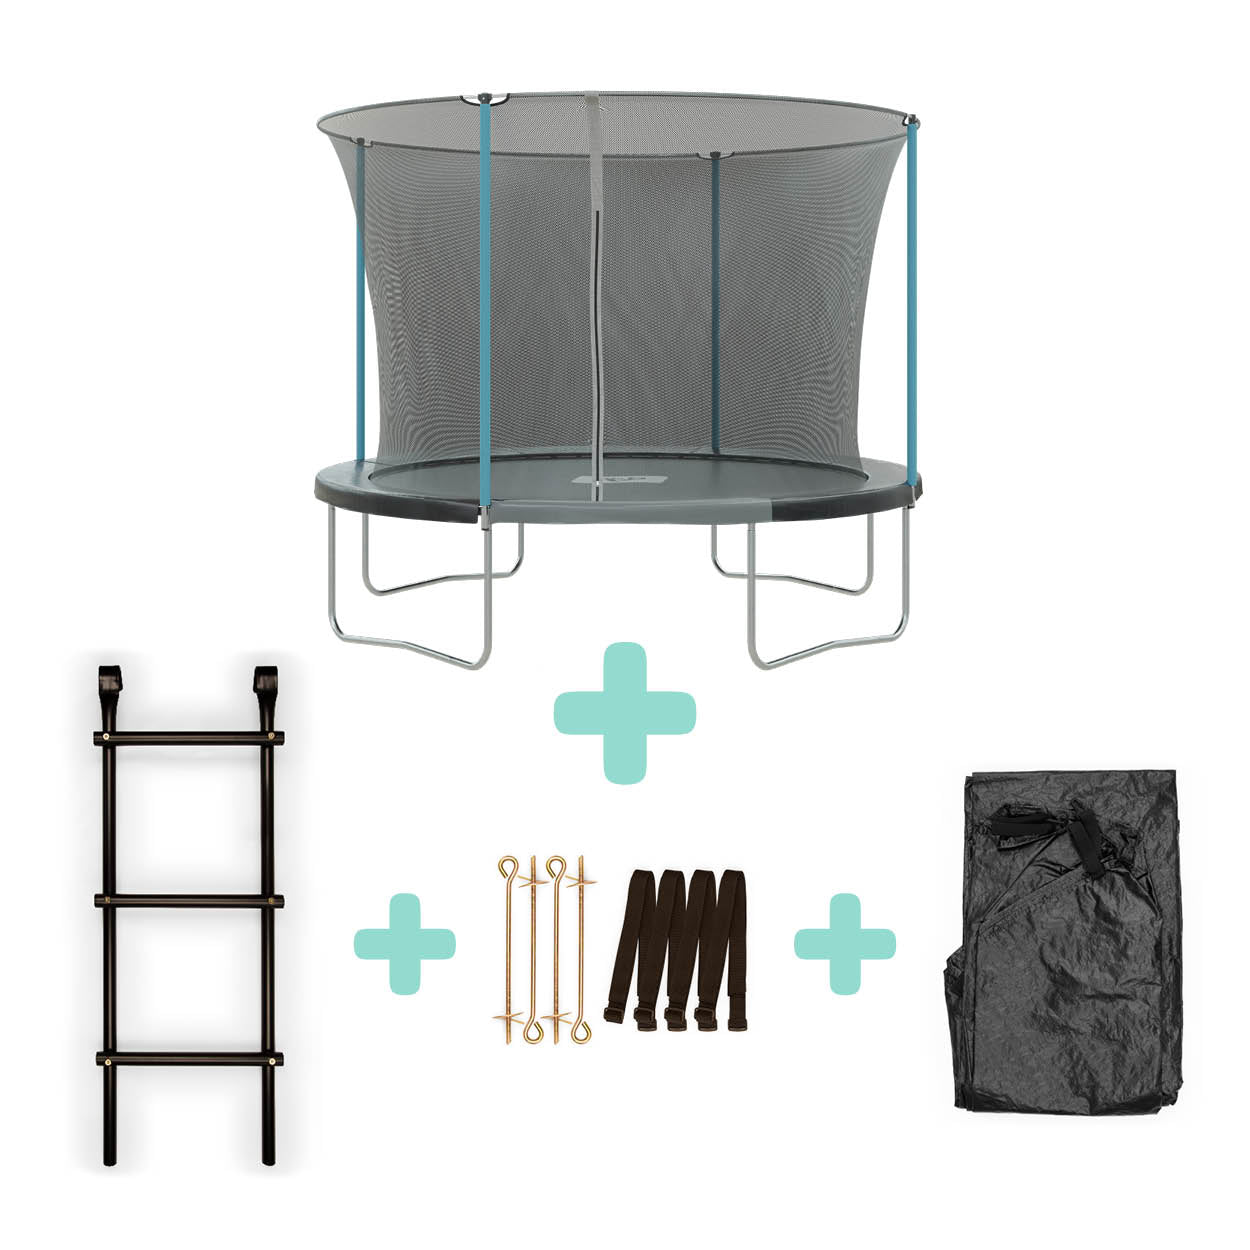 TP Up All In One 10ft Trampoline Bundle